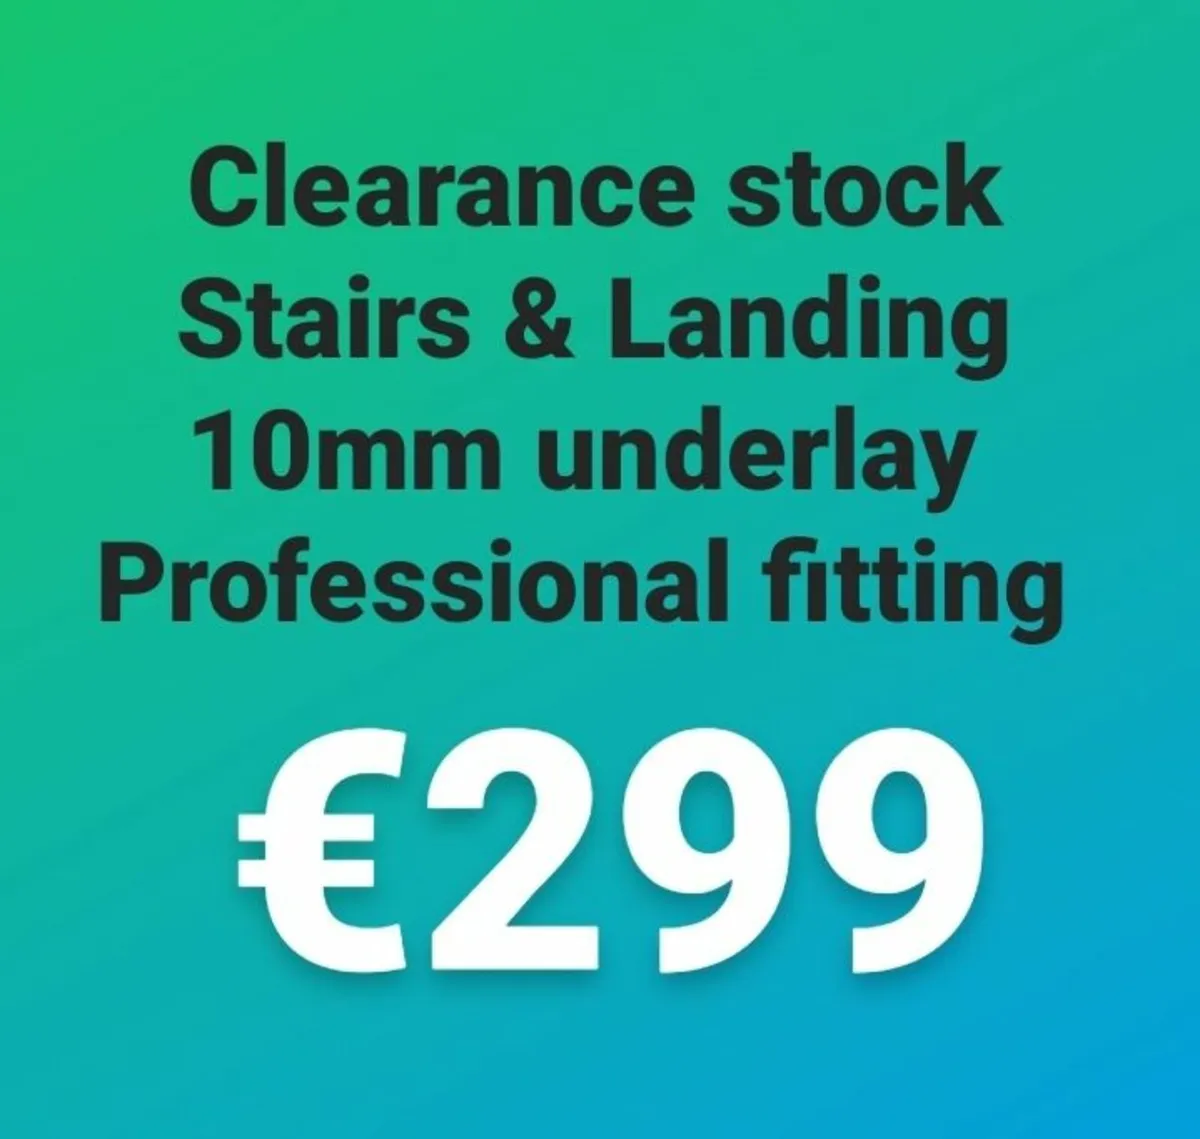 Carpet clearance offer stair & Landing - Image 1